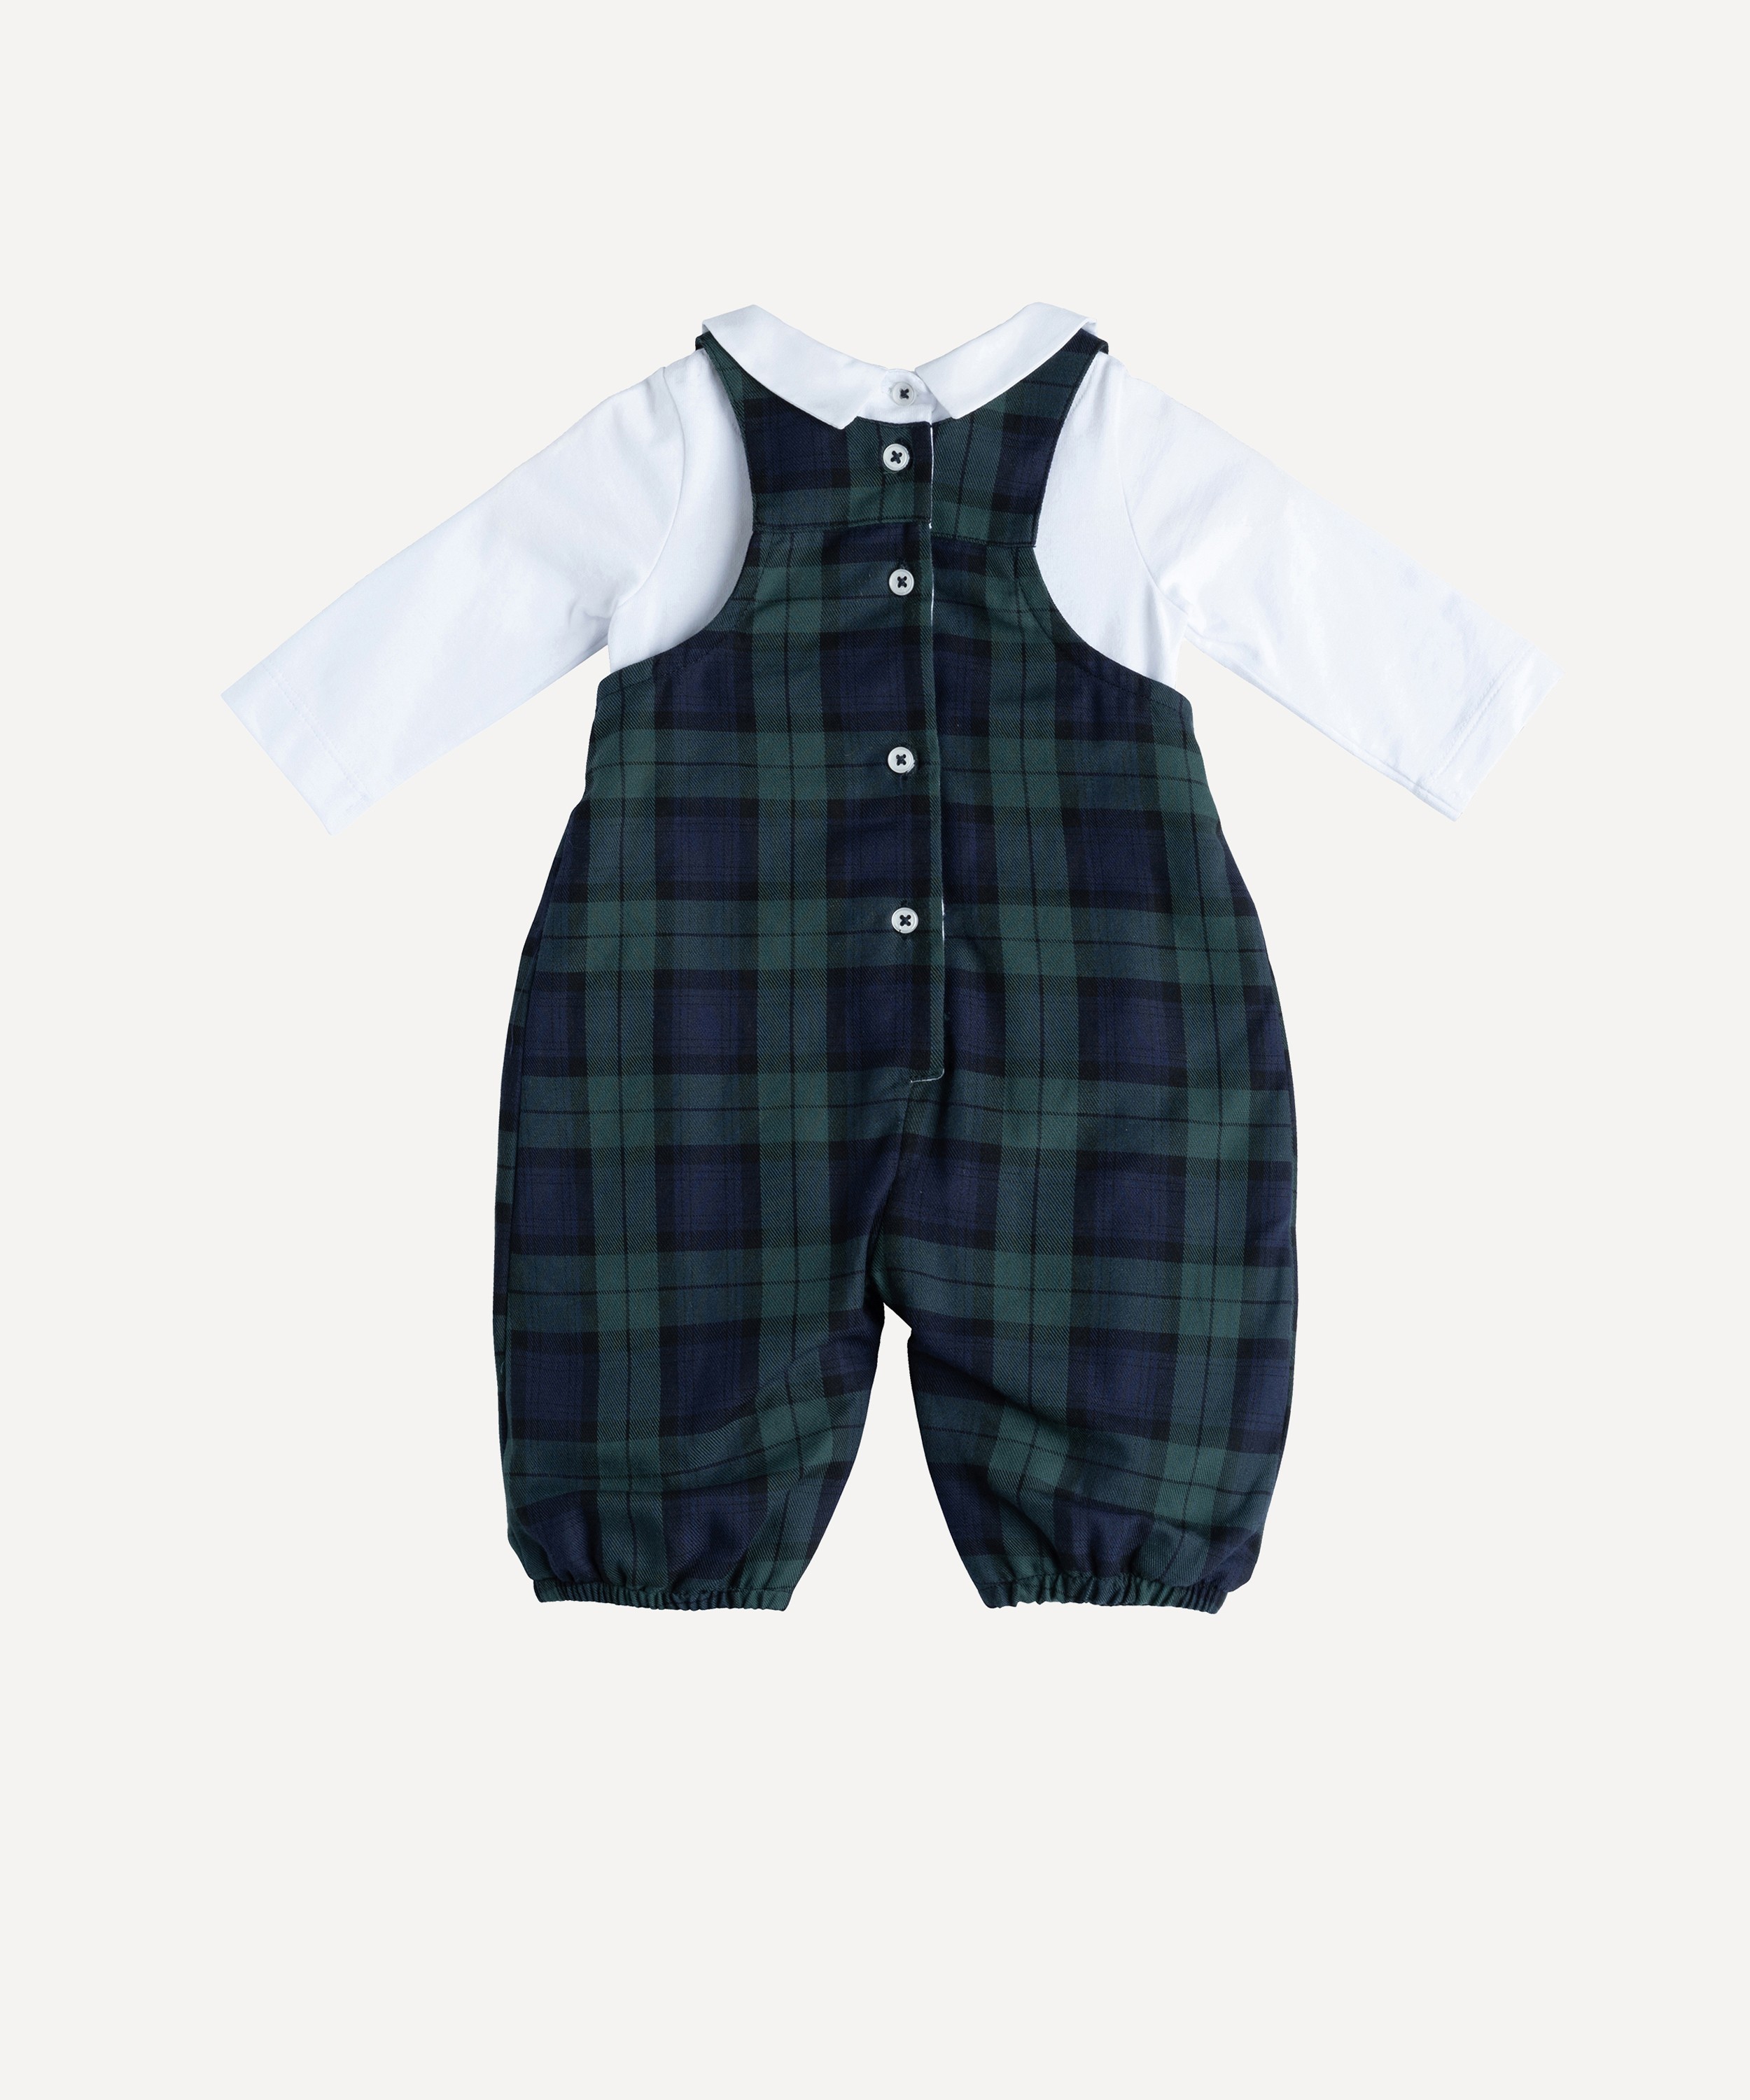 Trotters - My First Christmas Dungarees 0-9 Months image number 1